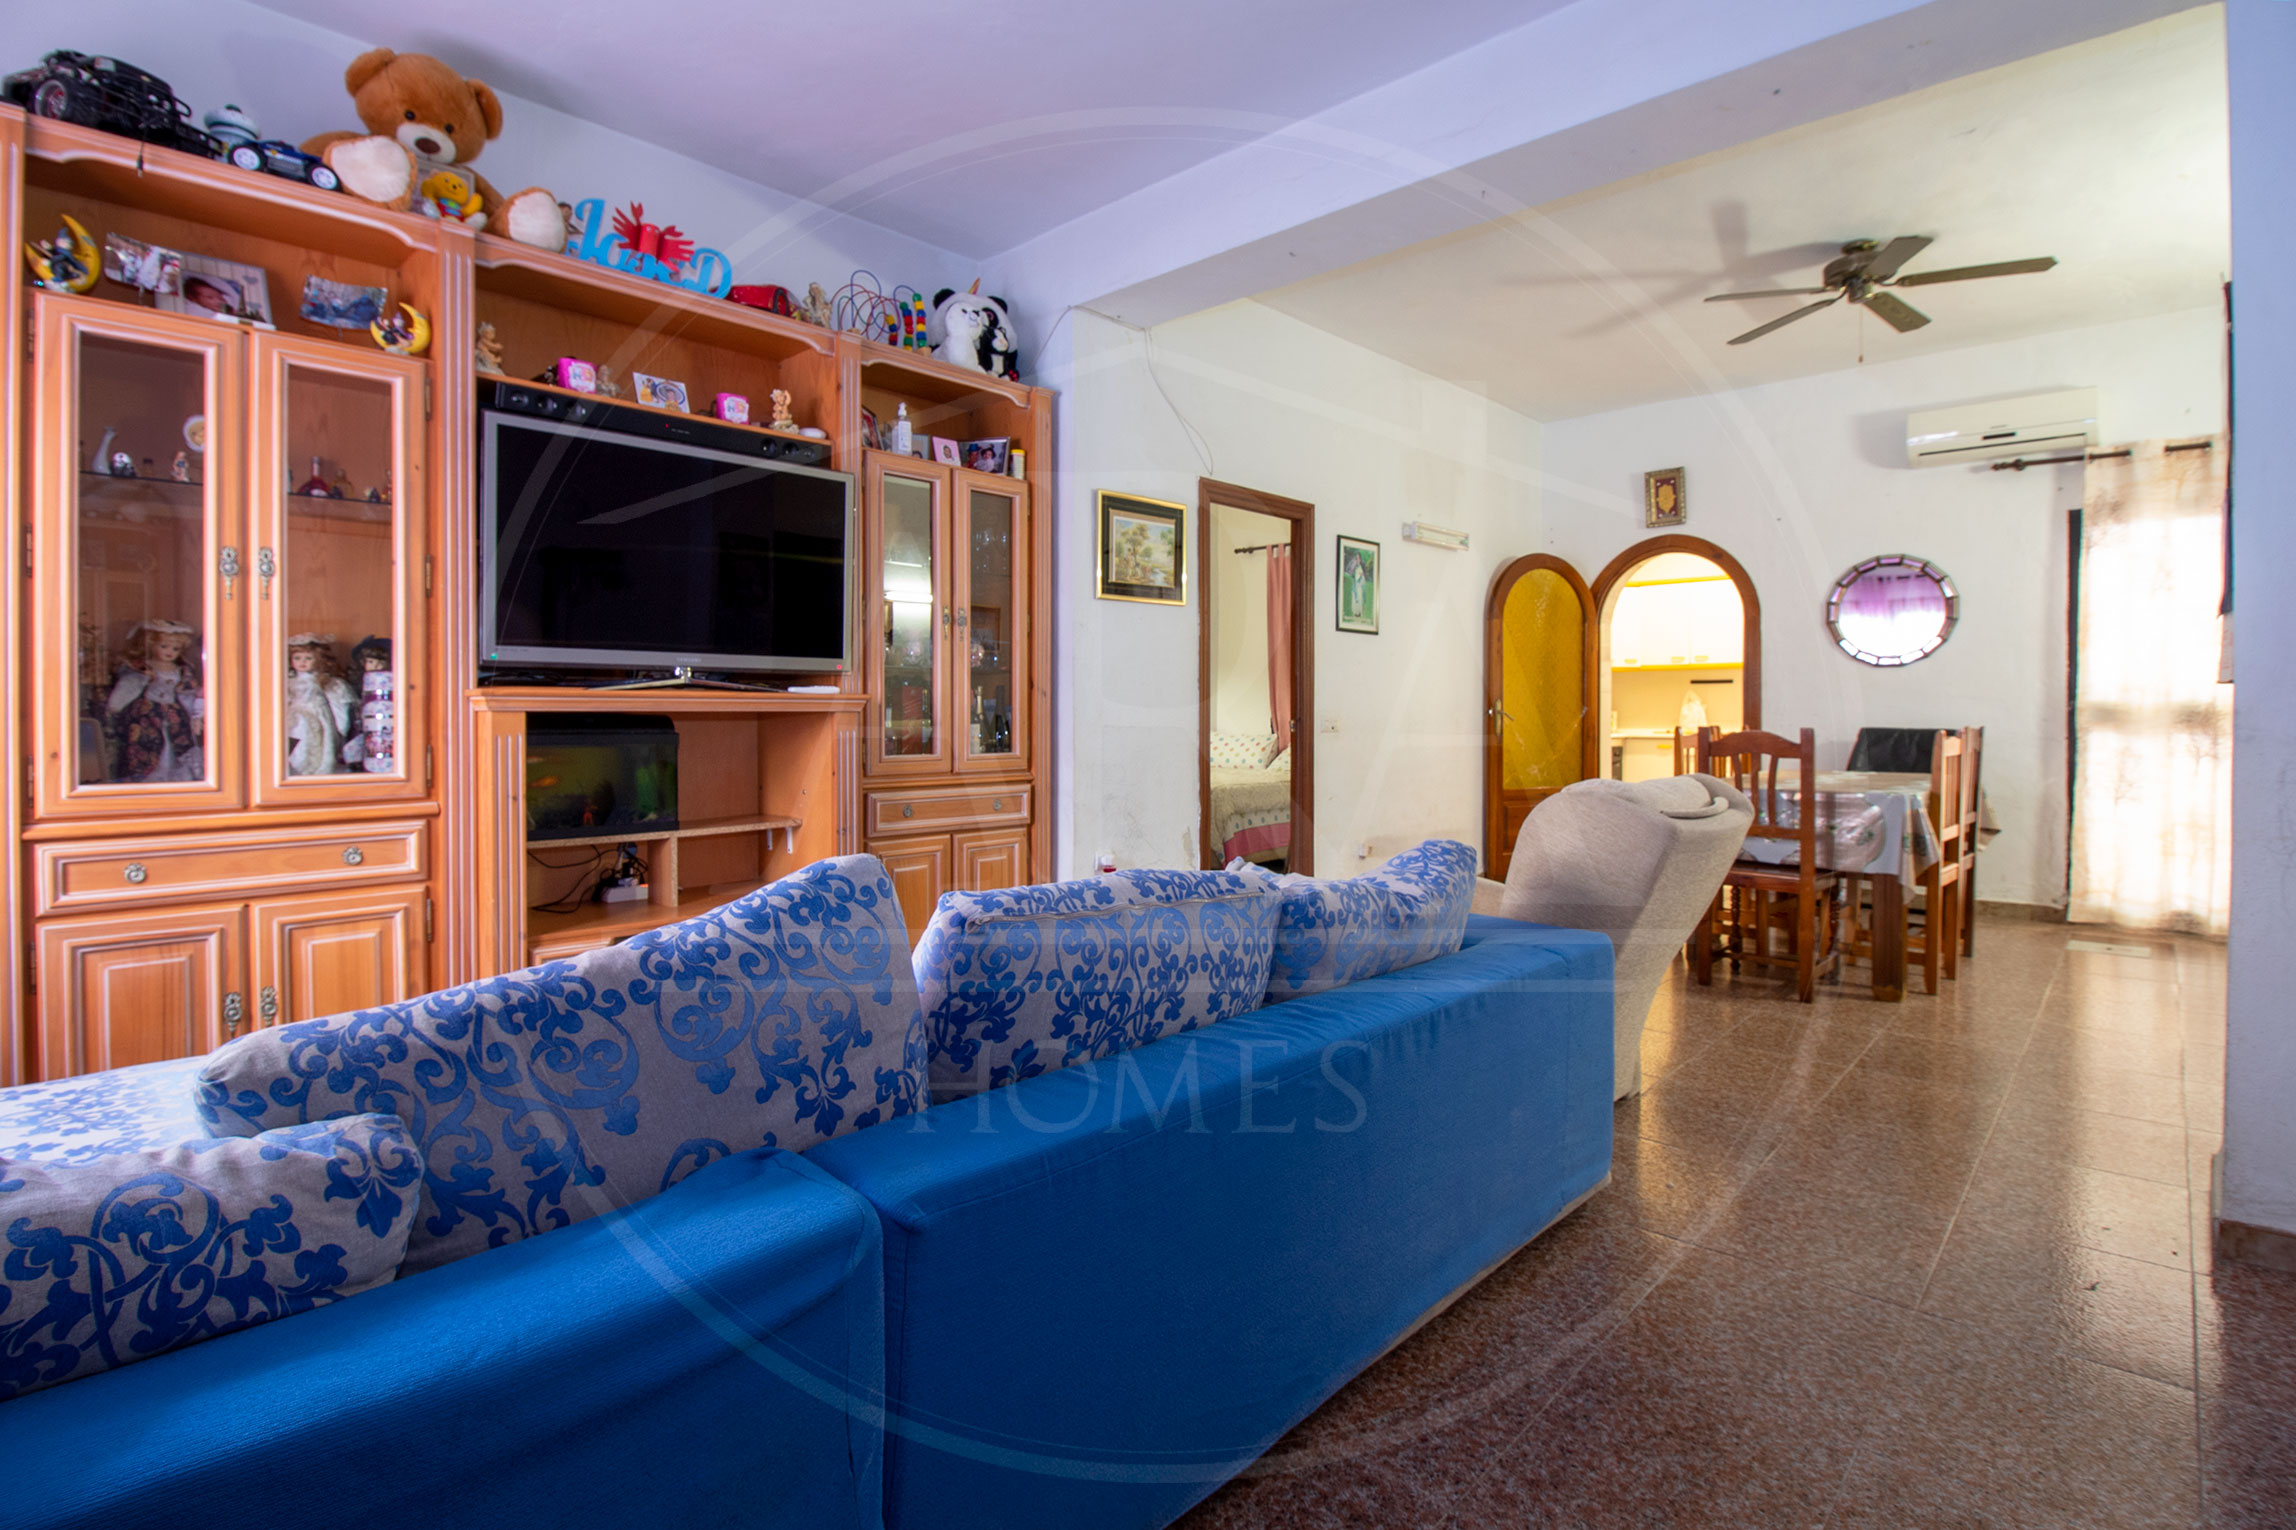 Apartment for sale in the center of Fuengirola to reform.